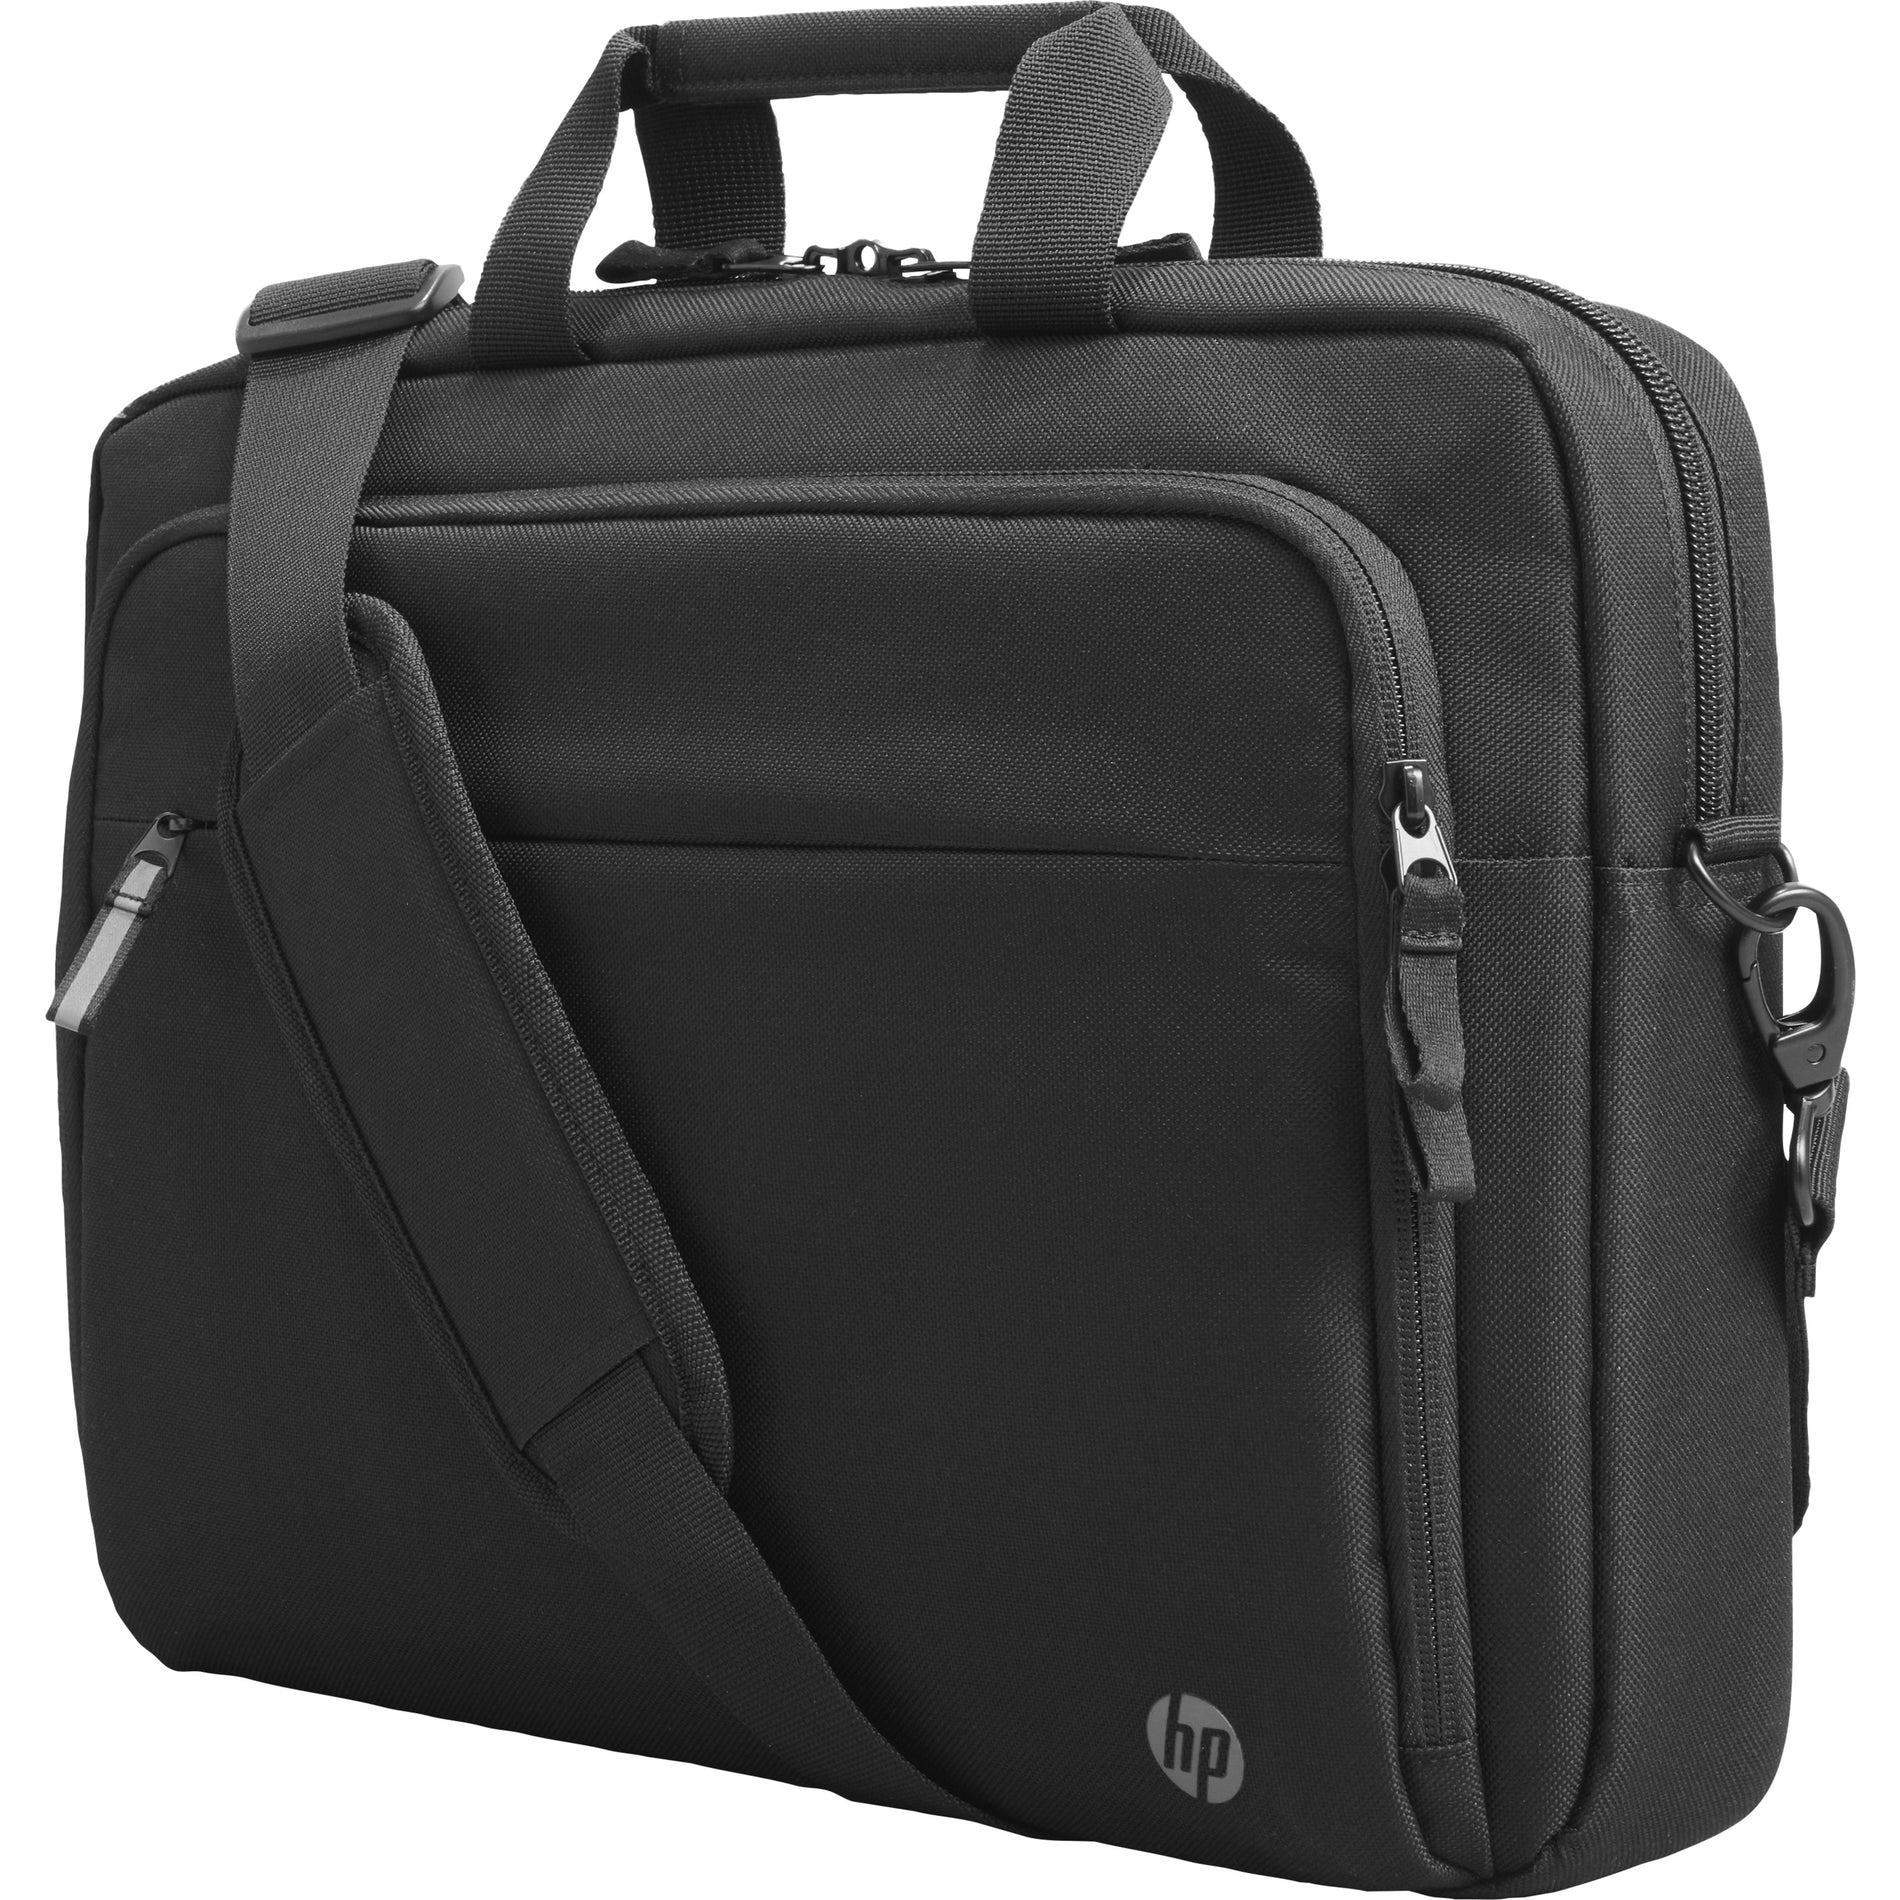 HP 3E5F8AA Renew Business 15.6 Laptop Bag, Lightweight and Durable Carrying Case for HP Notebook